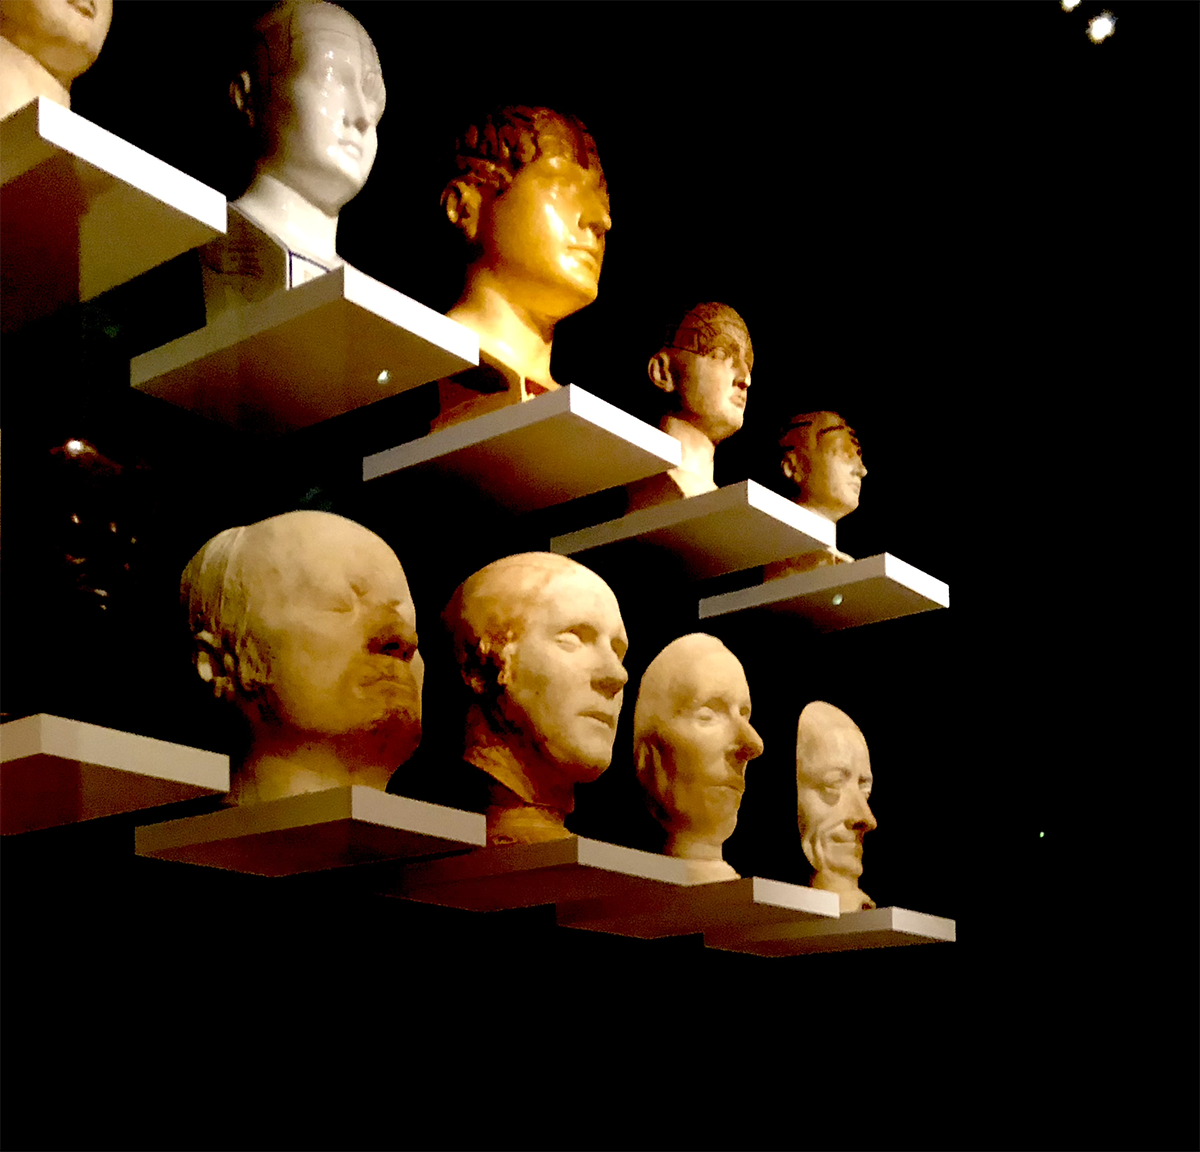 A collection of death masks